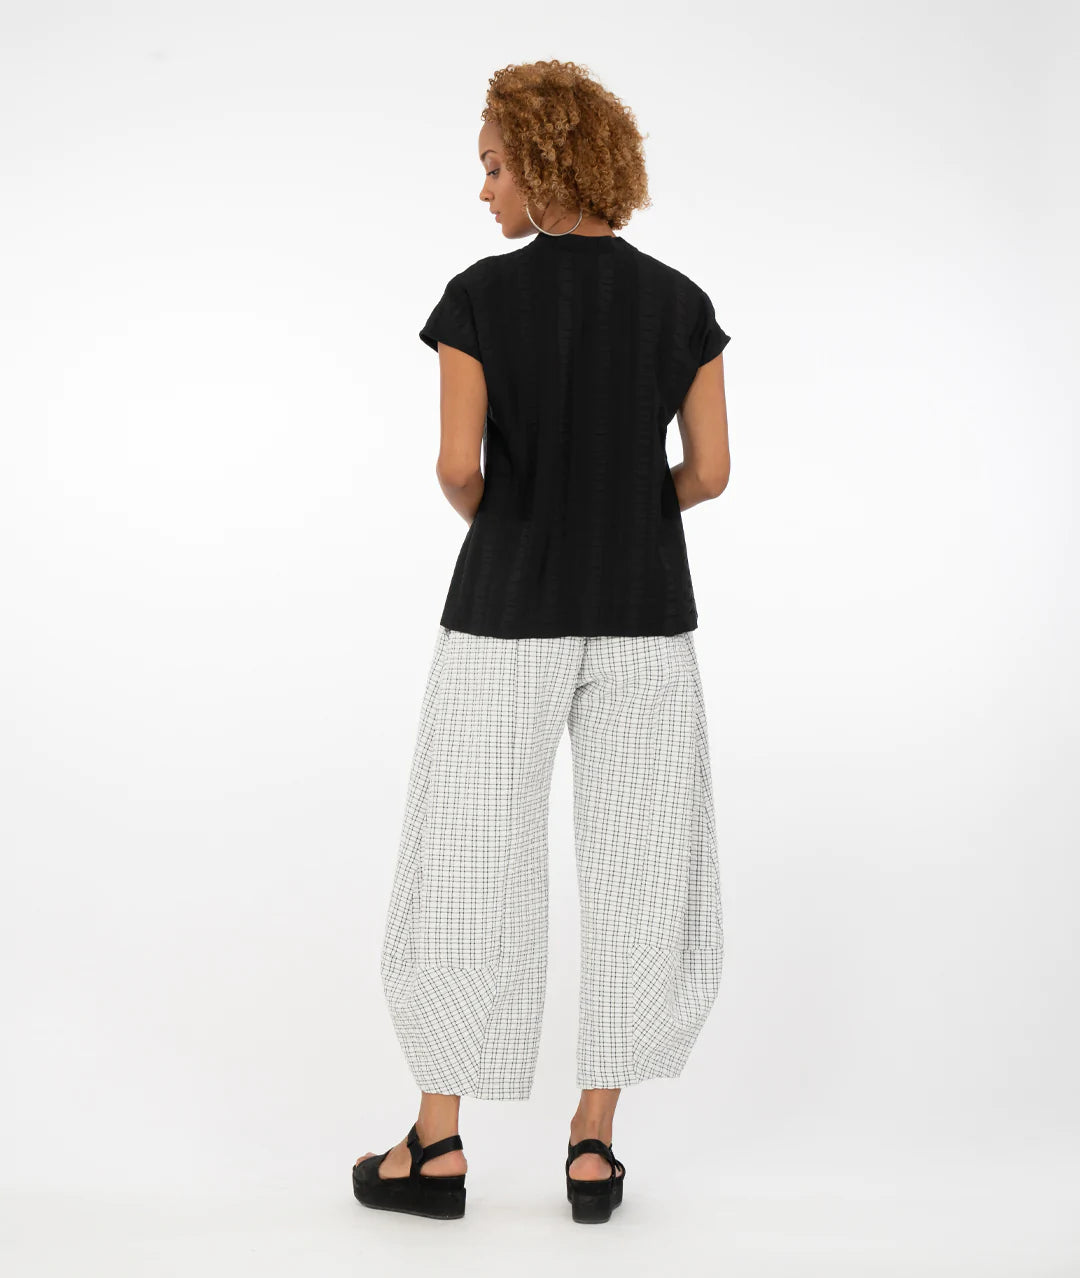 model wearing a black button up top with a black/white checkered pant in front of a white background